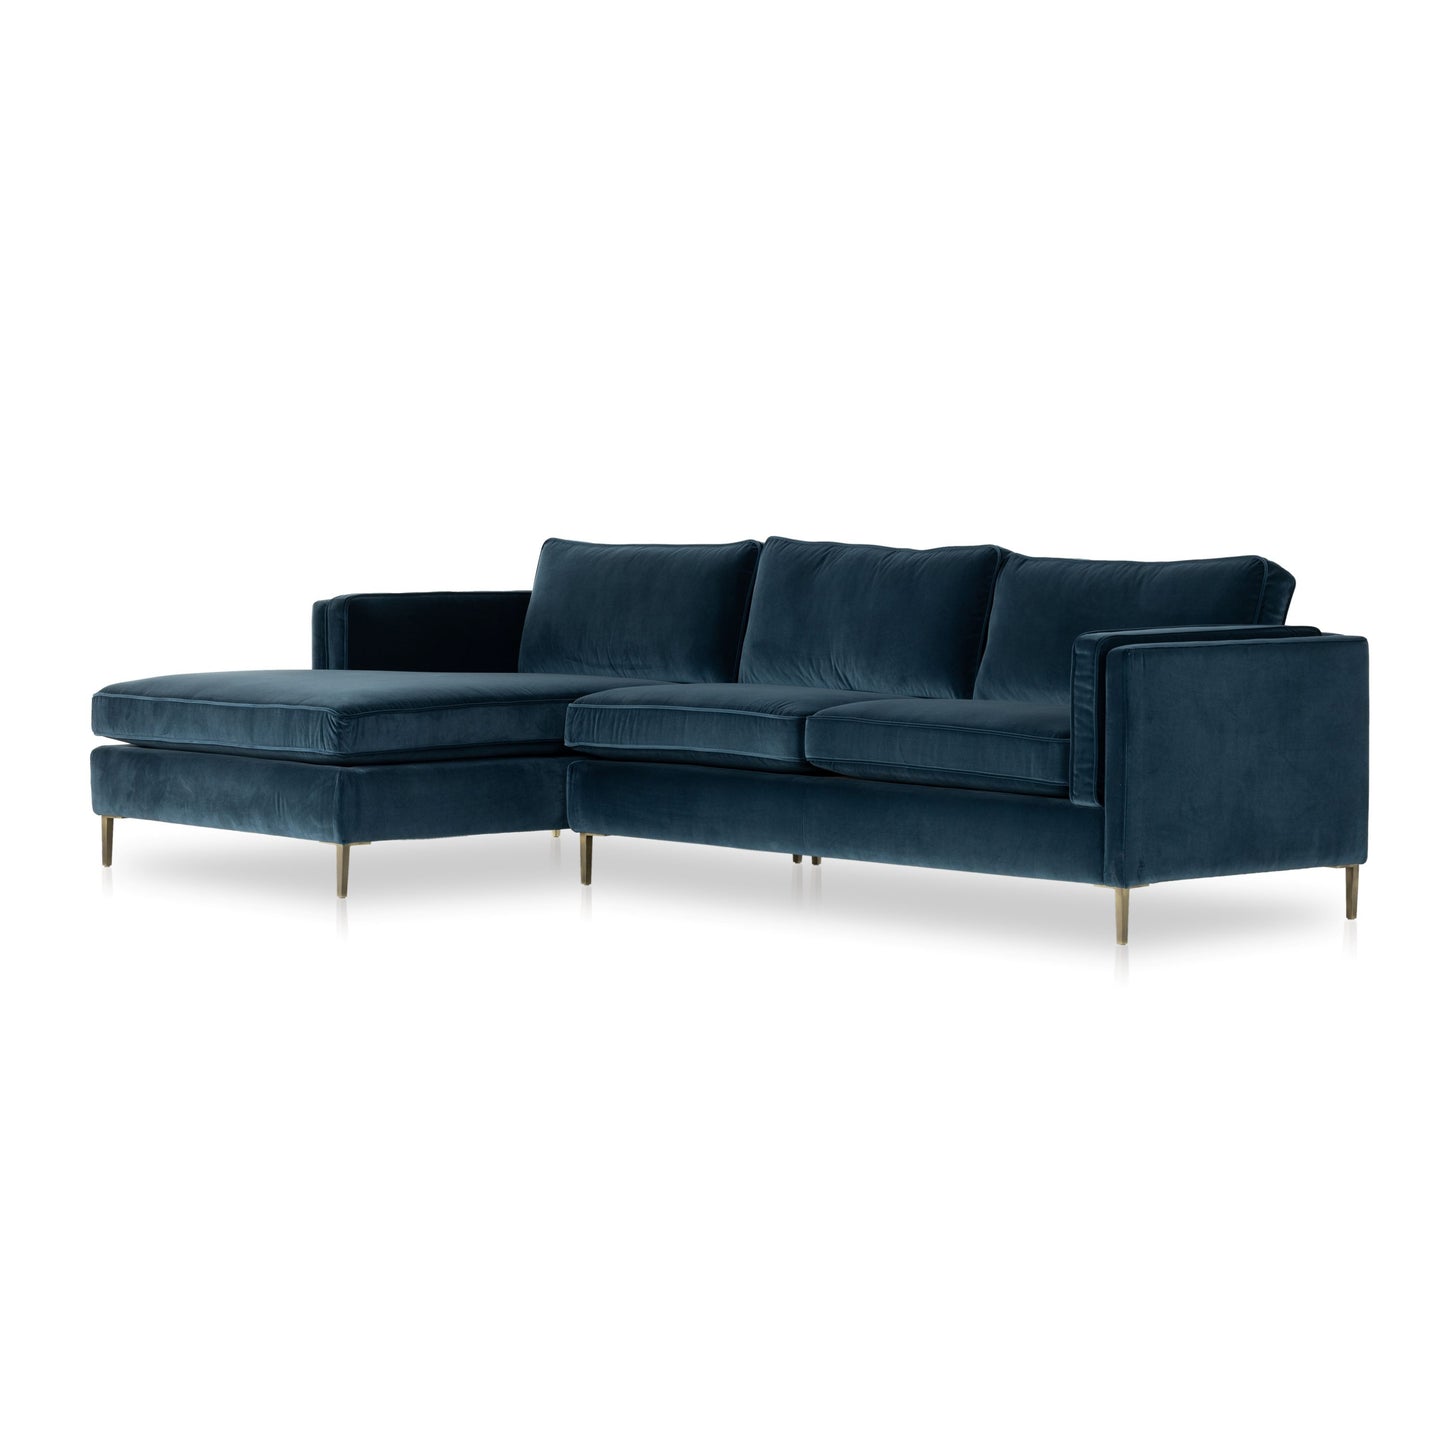 Load image into Gallery viewer, Emery 2pc Sectional Sapphire Bay / Left FacingSectiona Sofa Four Hands  Sapphire Bay Left Facing  Four Hands, Mid Century Modern Furniture, Old Bones Furniture Company, Old Bones Co, Modern Mid Century, Designer Furniture, https://www.oldbonesco.com/
